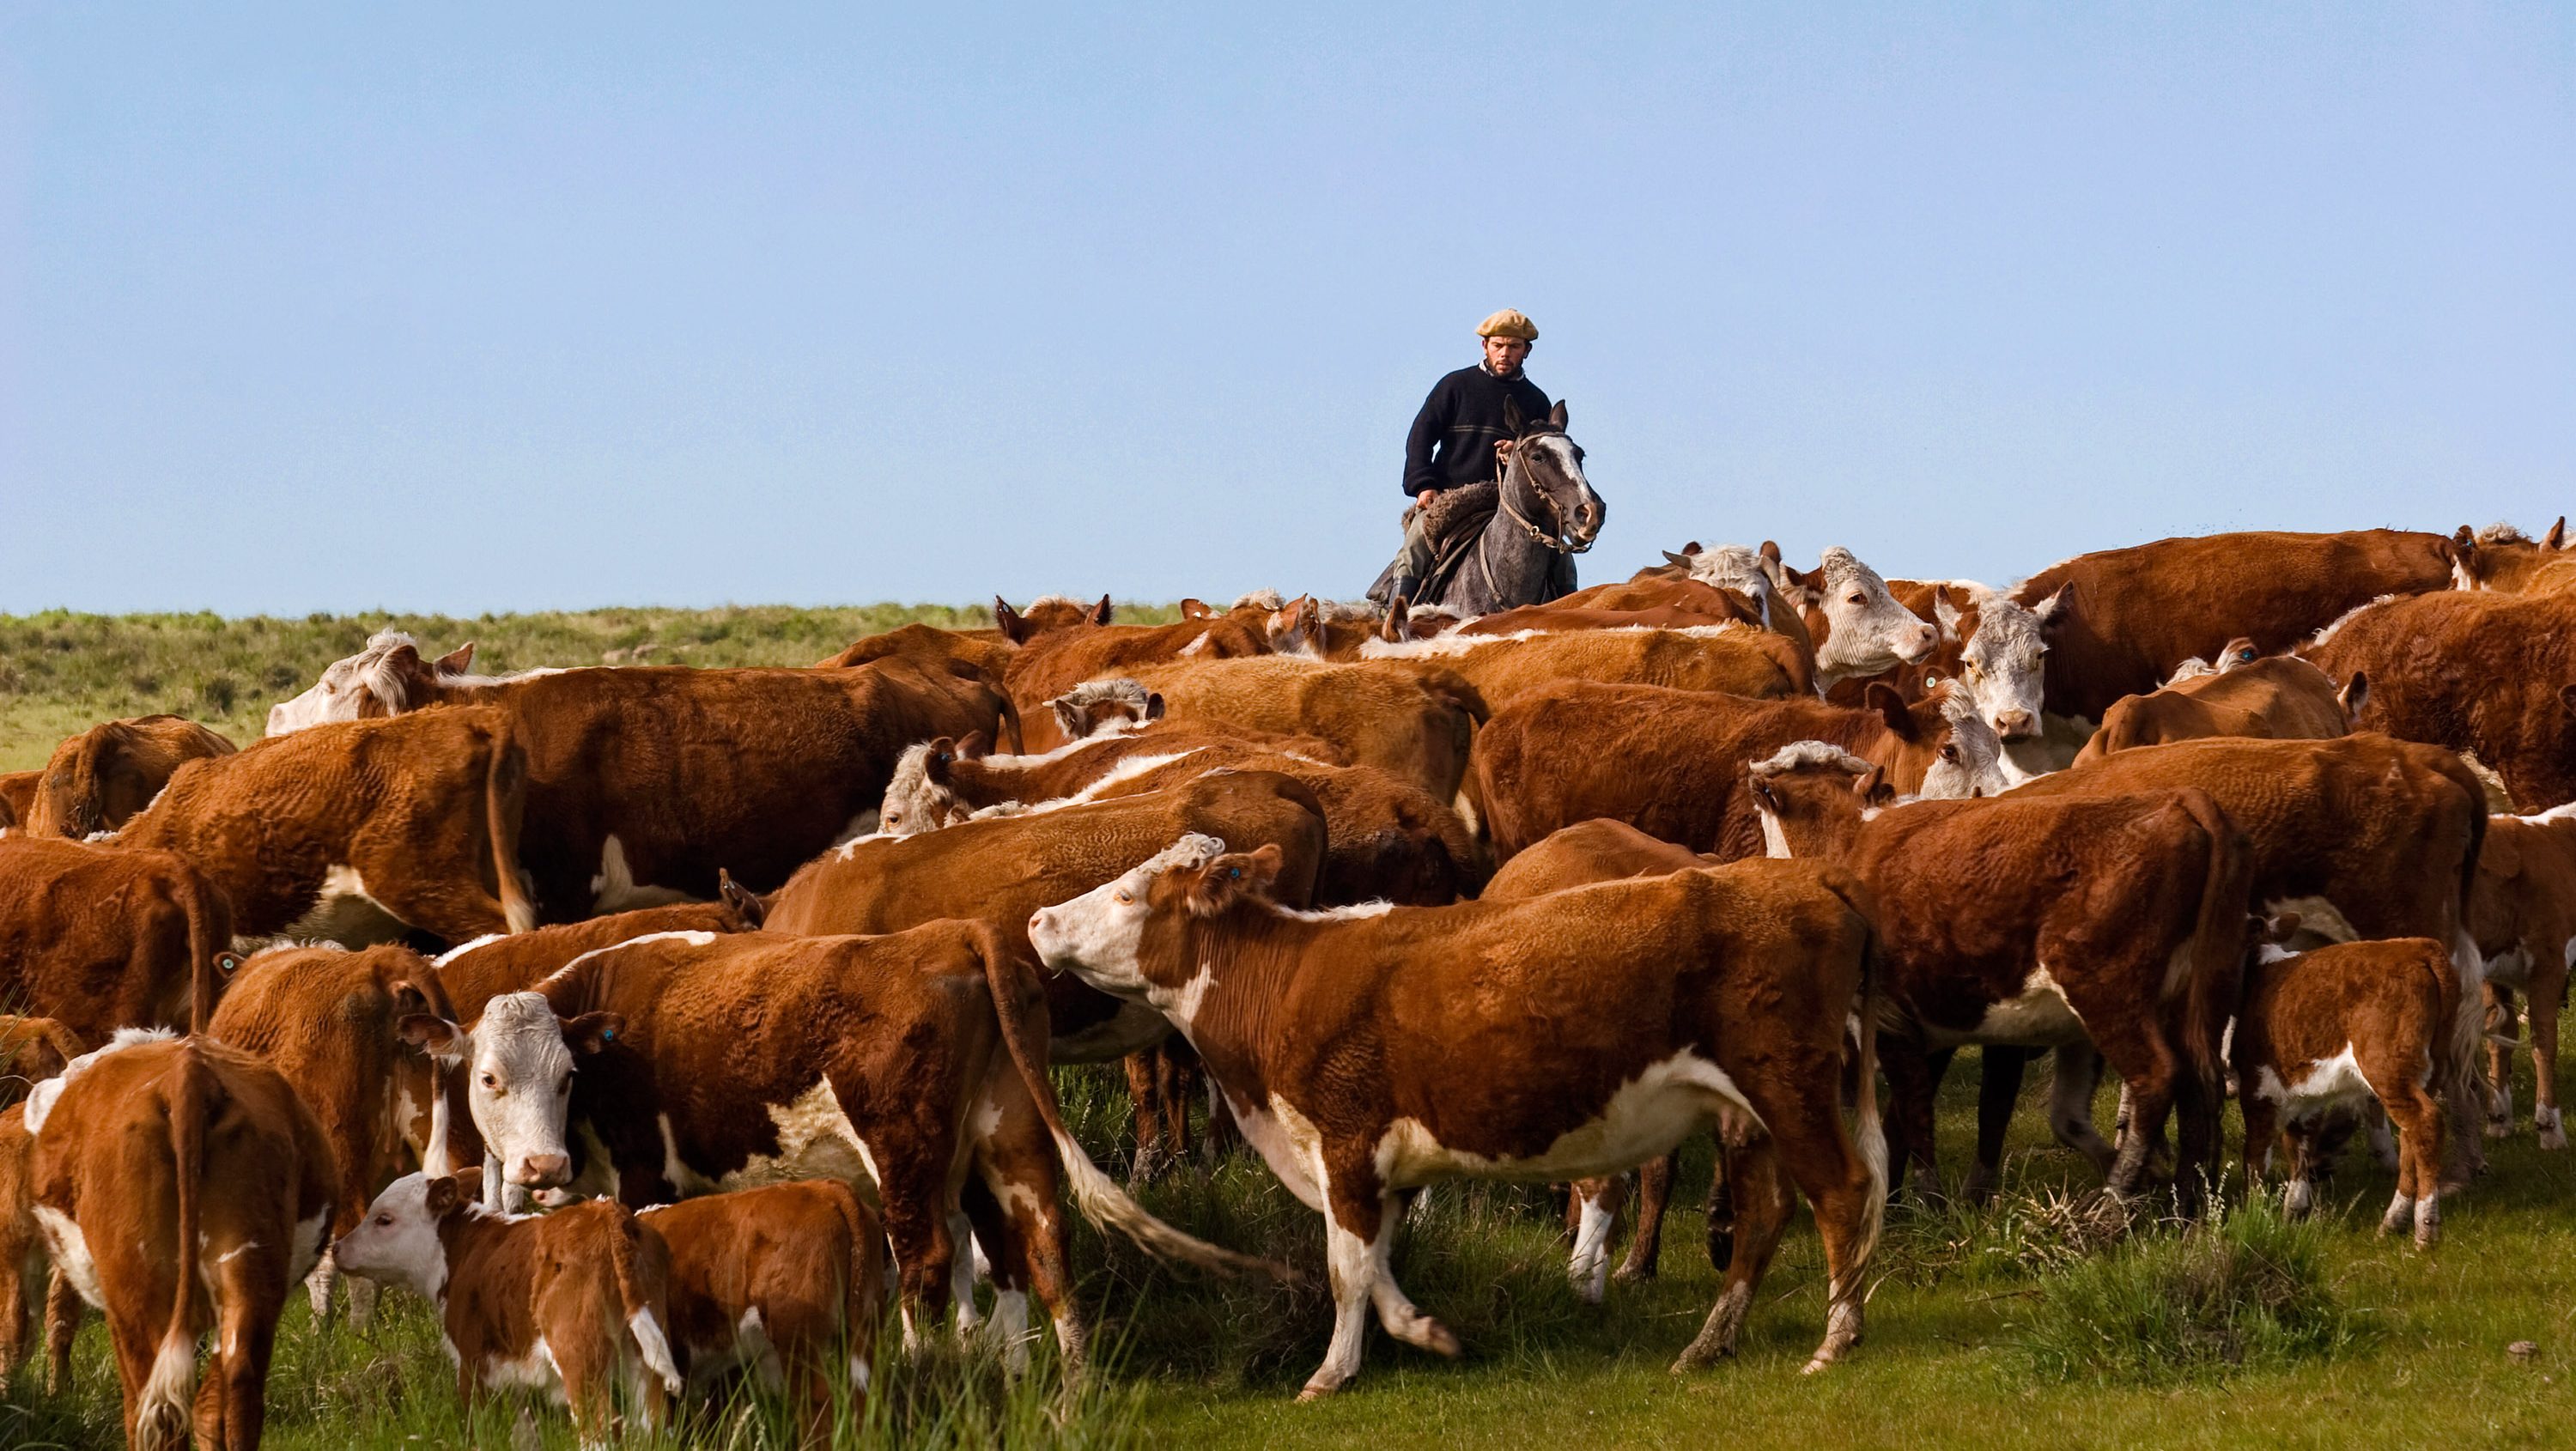 Cows at pasture watched by a man on a horse in Uruguay